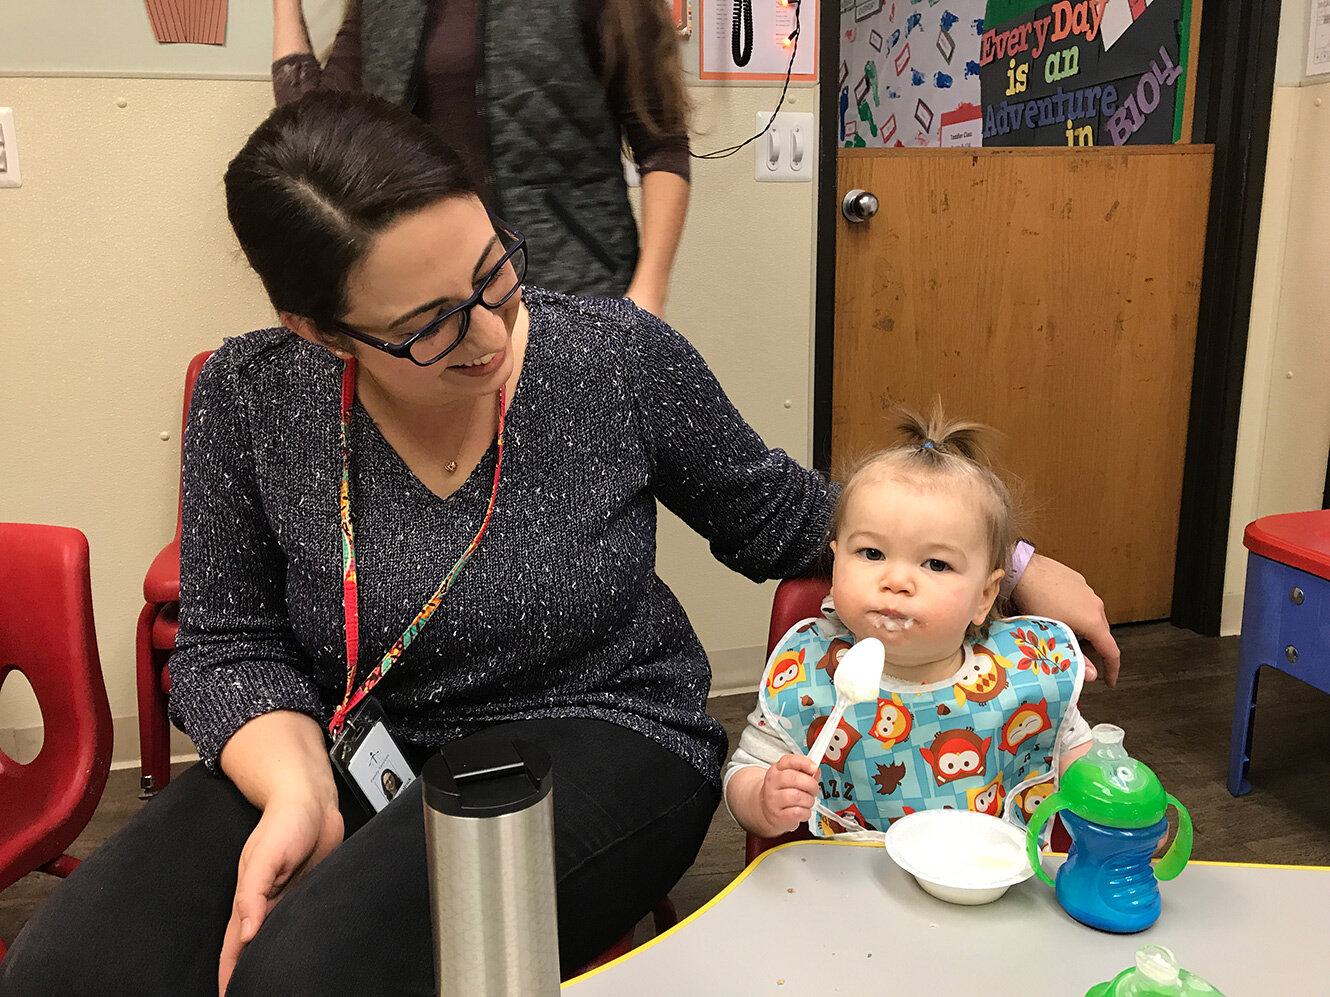  Krista visits Amelia’s classroom for a “Breakfast Buddies” event in 2019. 